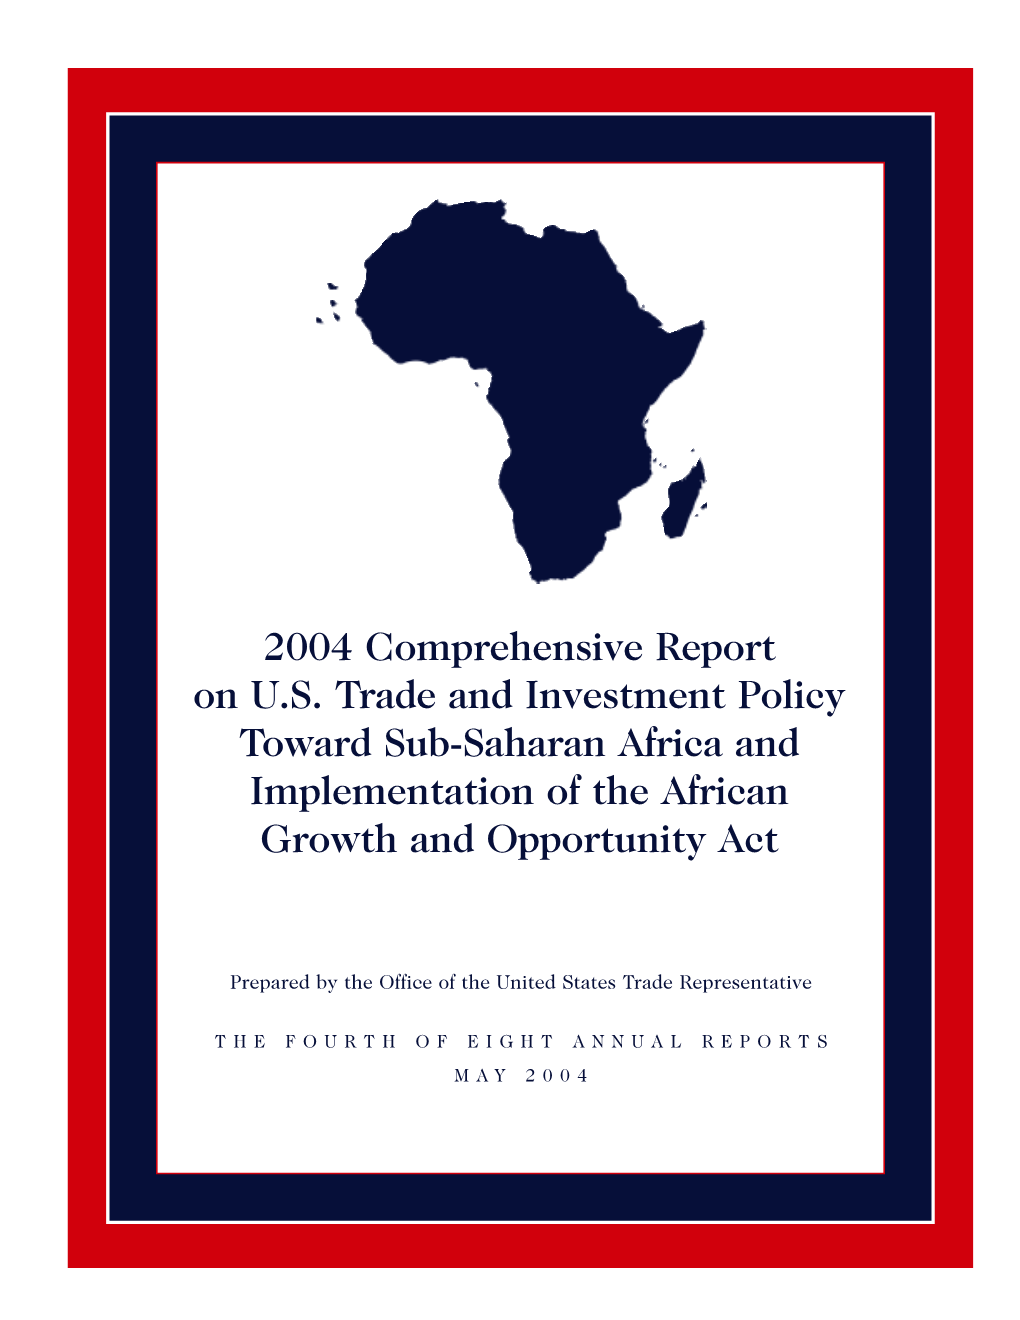 2004 Comprehensive Report on U.S. Trade and Investment Policy Toward Sub-Saharan Africa and Implementation of the African Growth and Opportunity Act